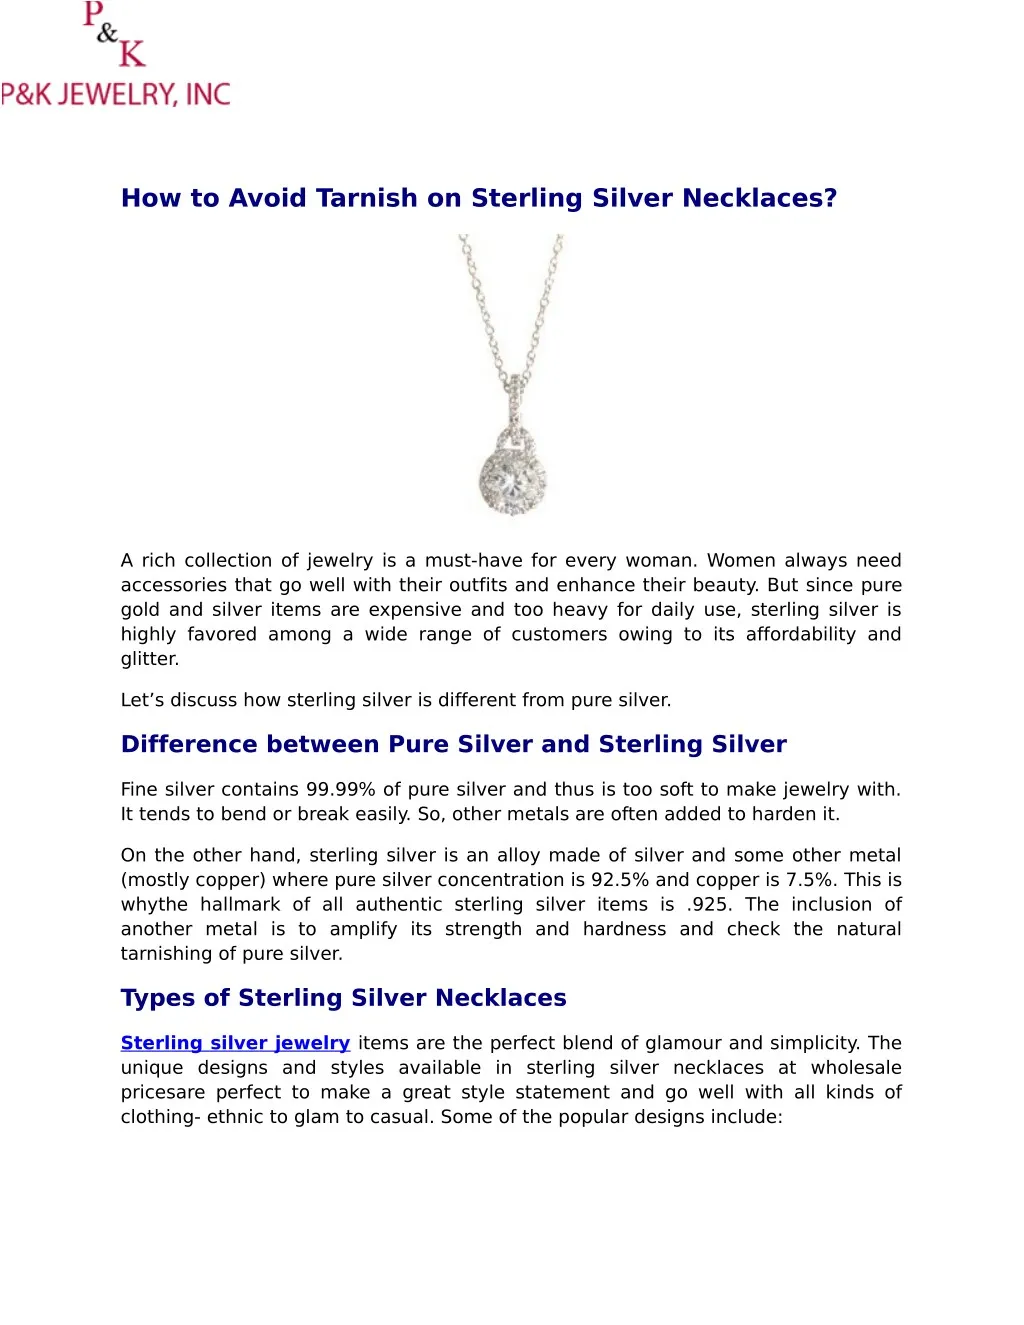 how to avoid tarnish on sterling silver necklaces